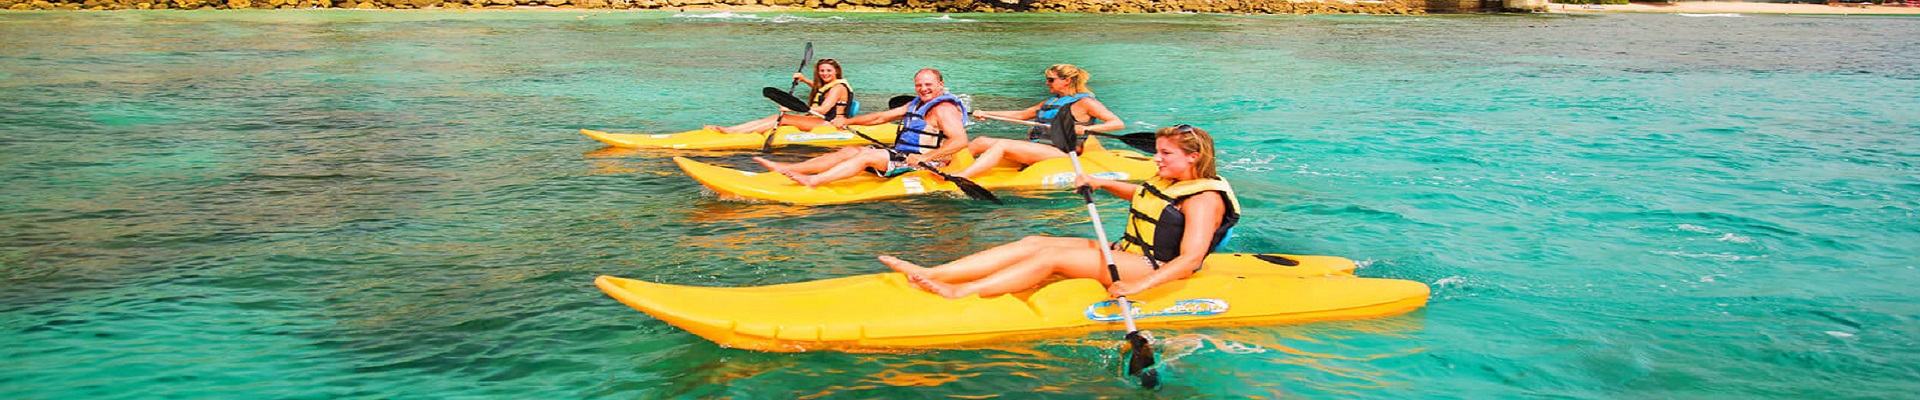 Water Sports at All-Inclusive Caribbean Resorts